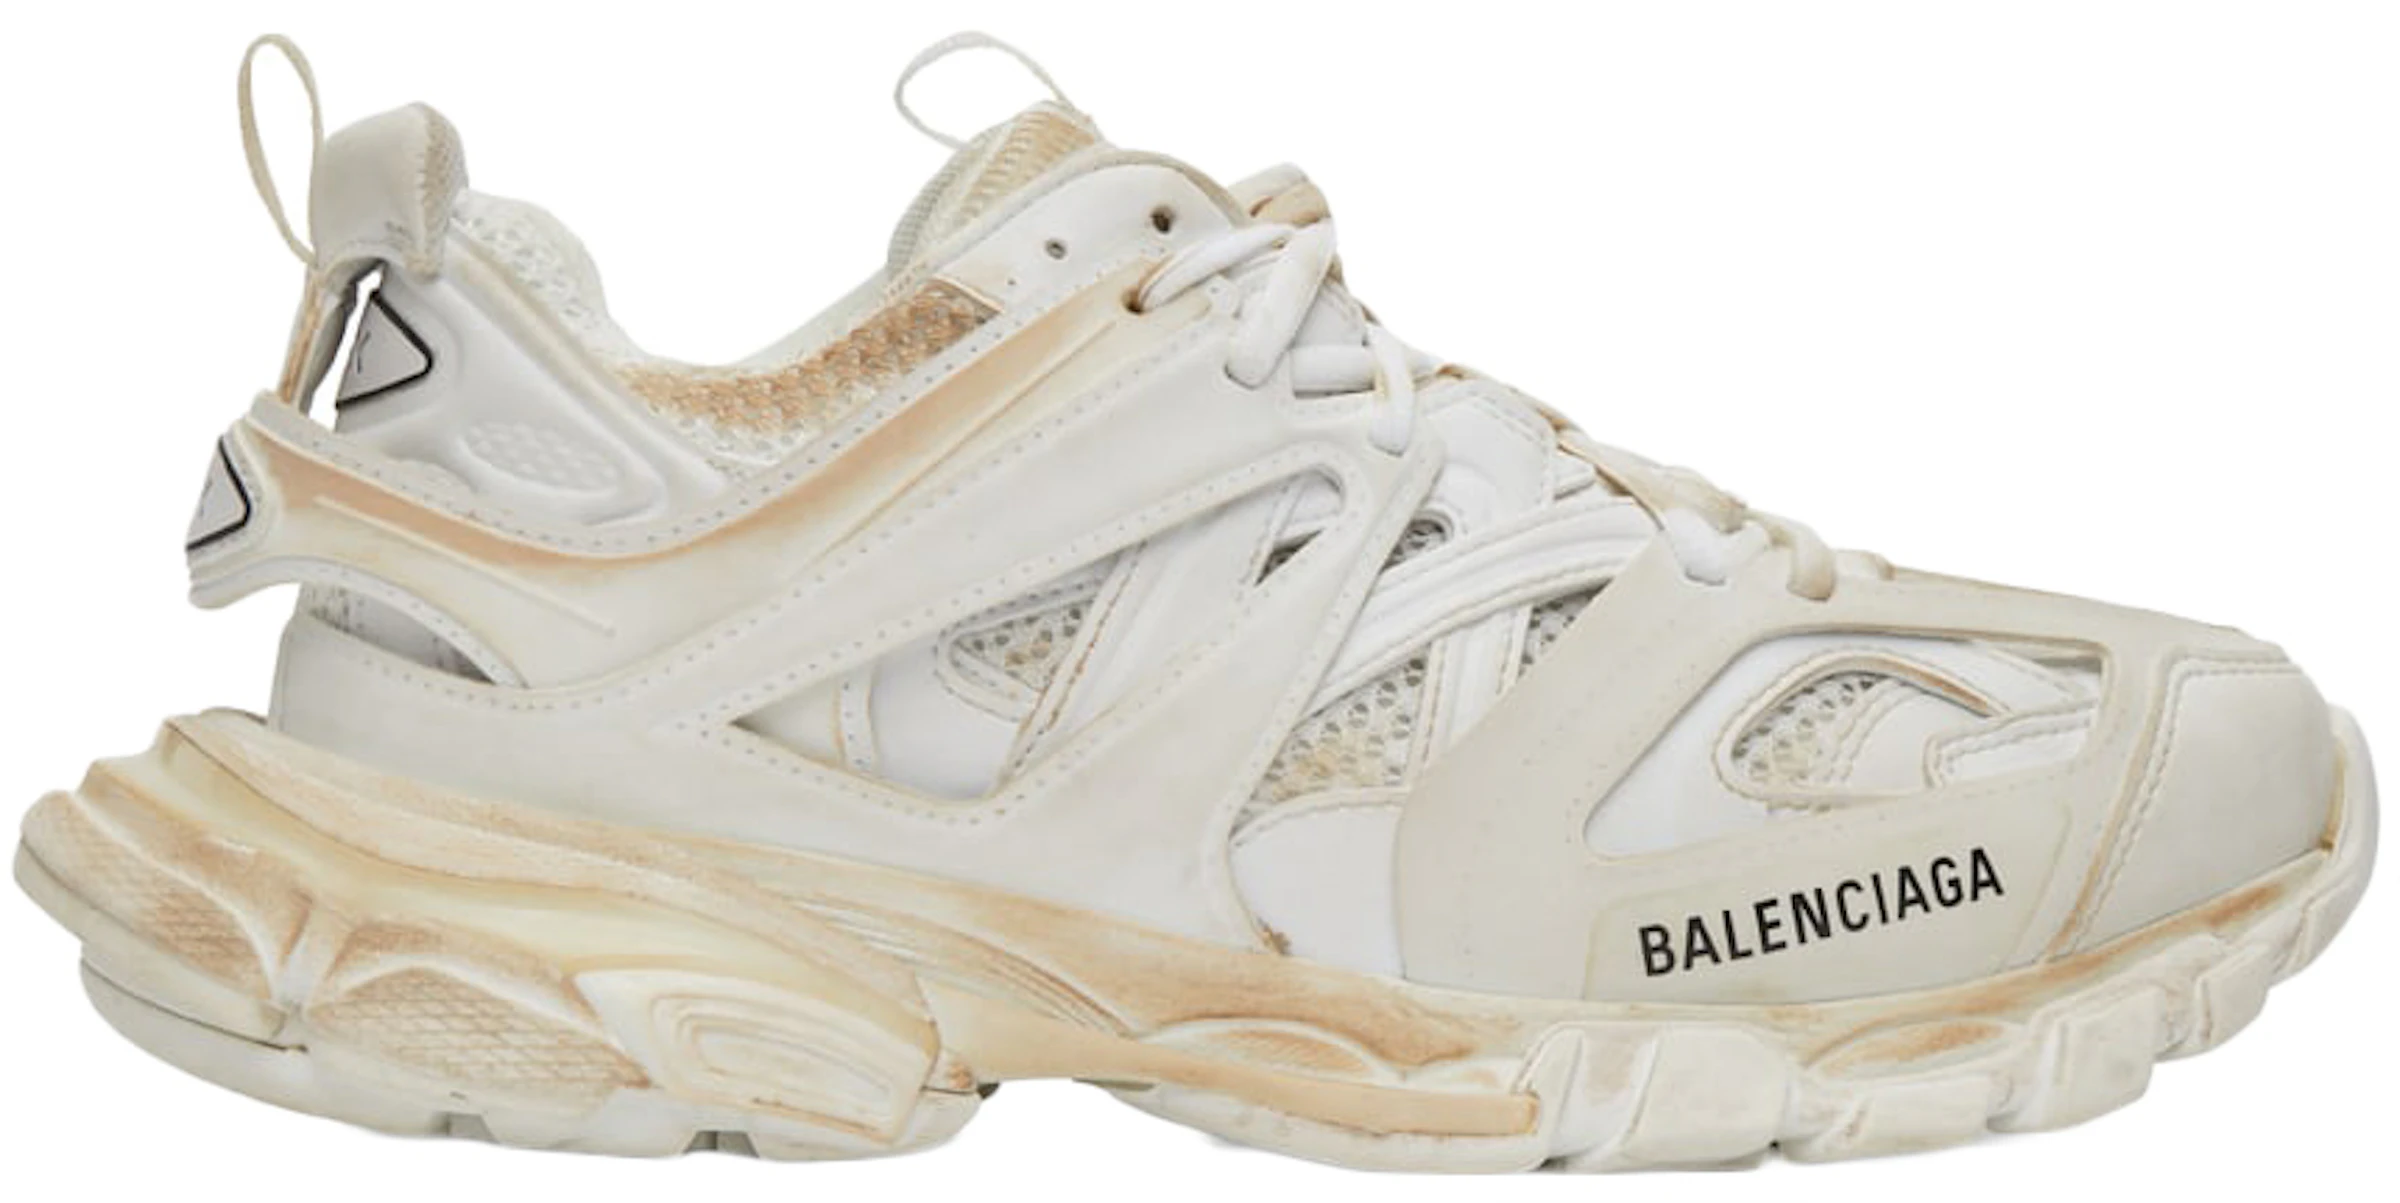 Balenciaga Track Worn Out In White - 212342M237075 - US